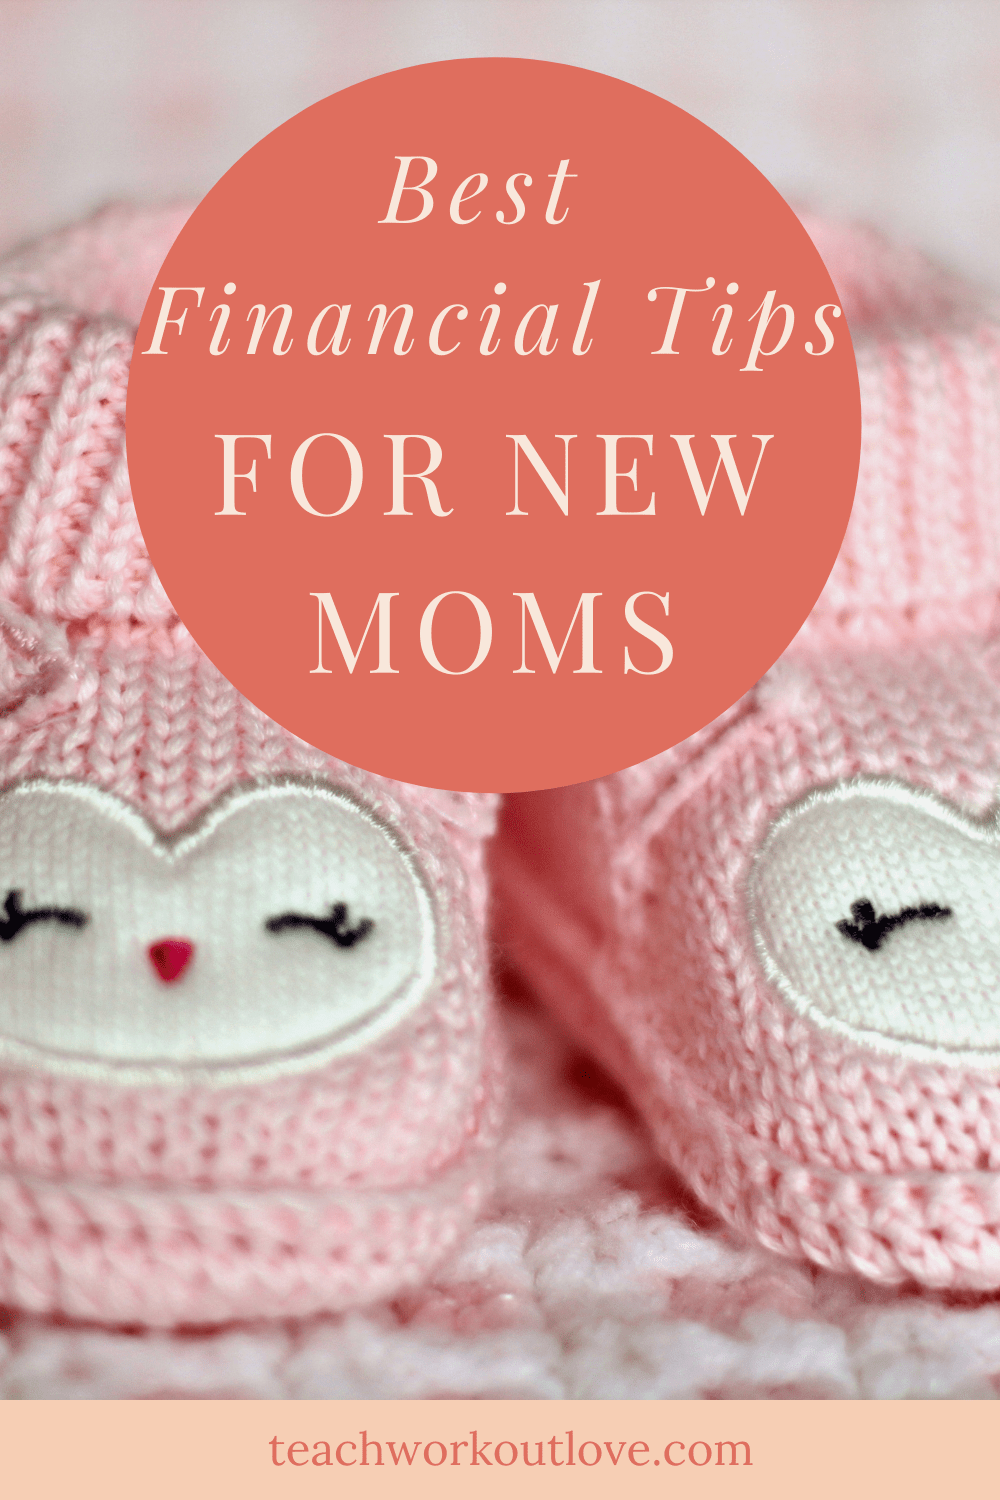 When you're on track about building your own family, money is the first thing that comes to mind. Here's some financial tips.